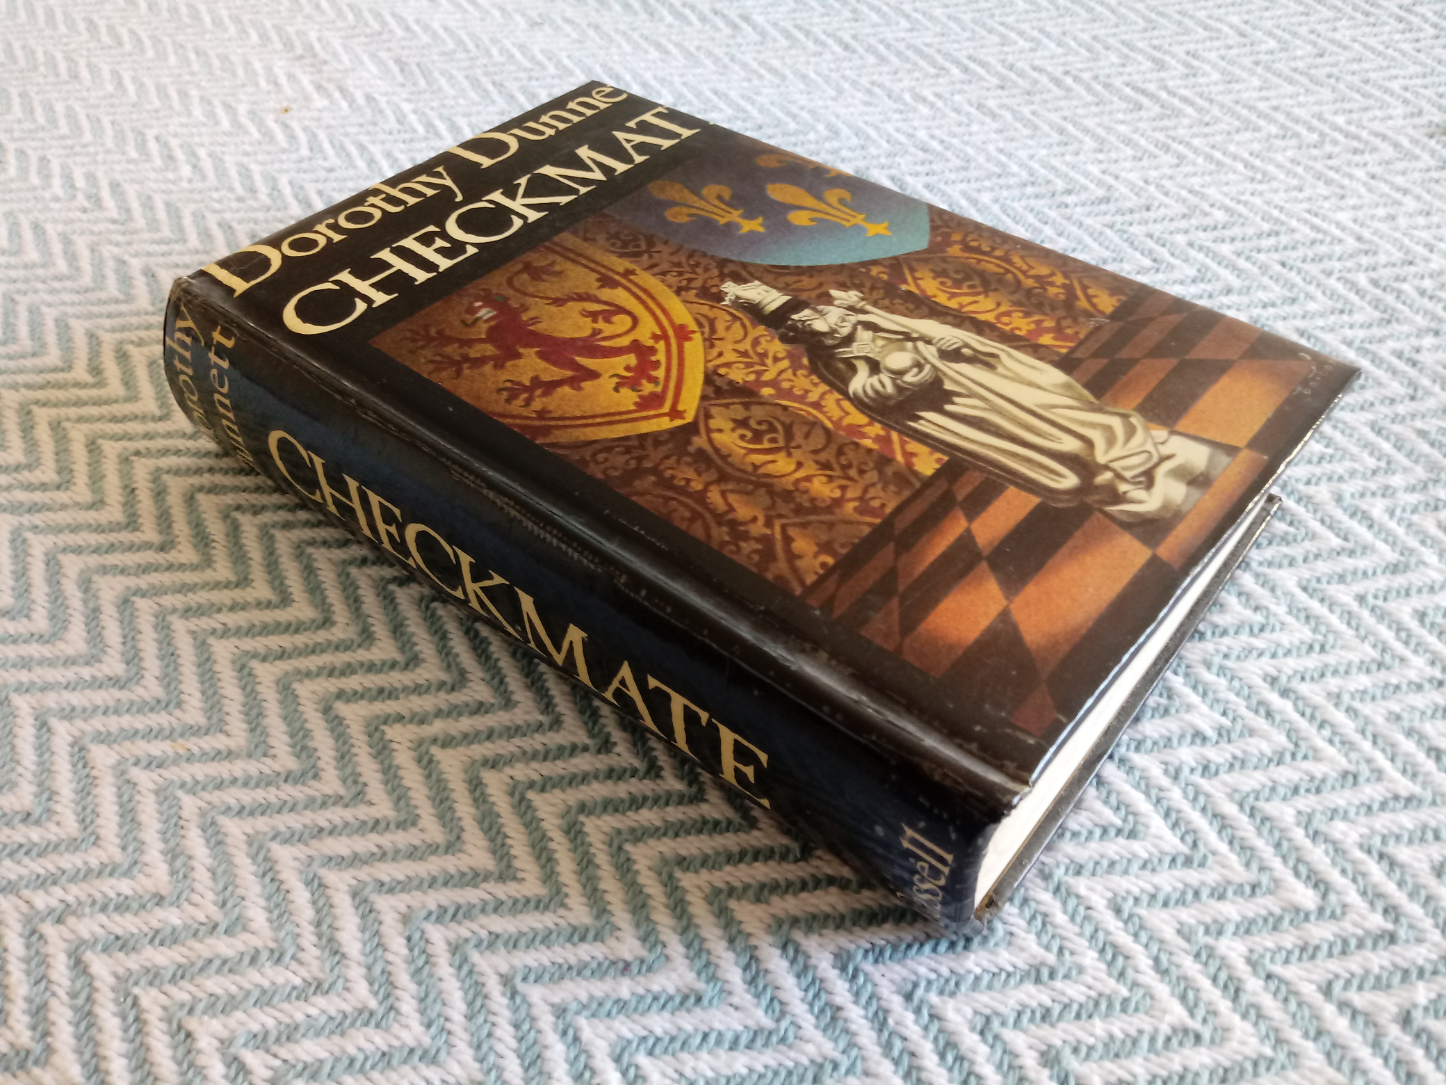 Checkmate by Dorothy Dunnett hardback book581 pages Published 1975 Cassell ISBN 0 304 29376 8.